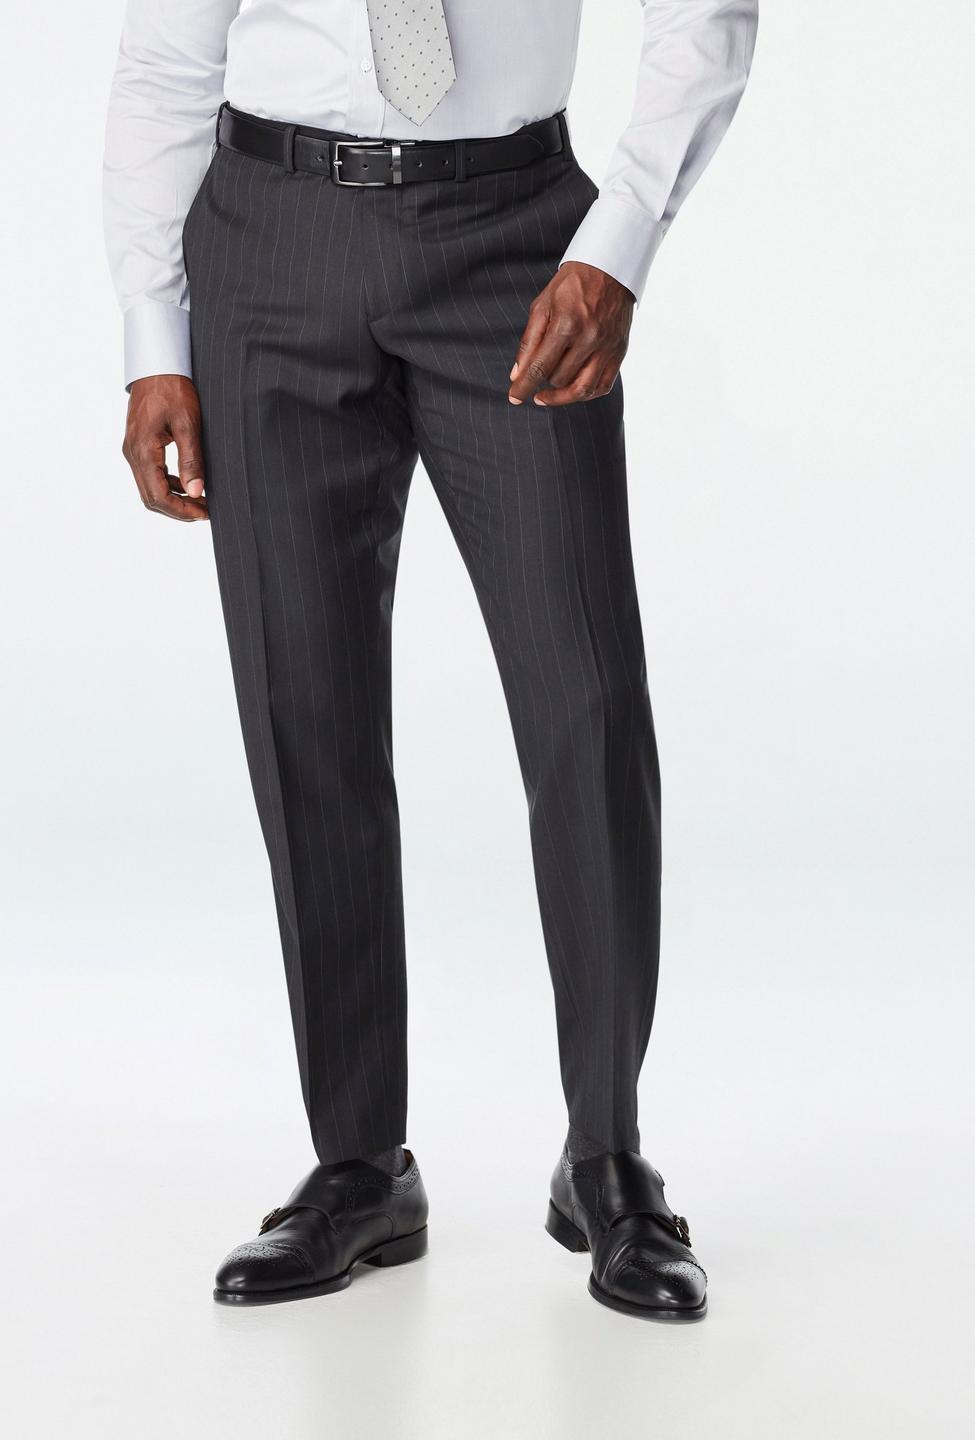 Gray pants - Hemsworth Striped Design from Premium Indochino Collection